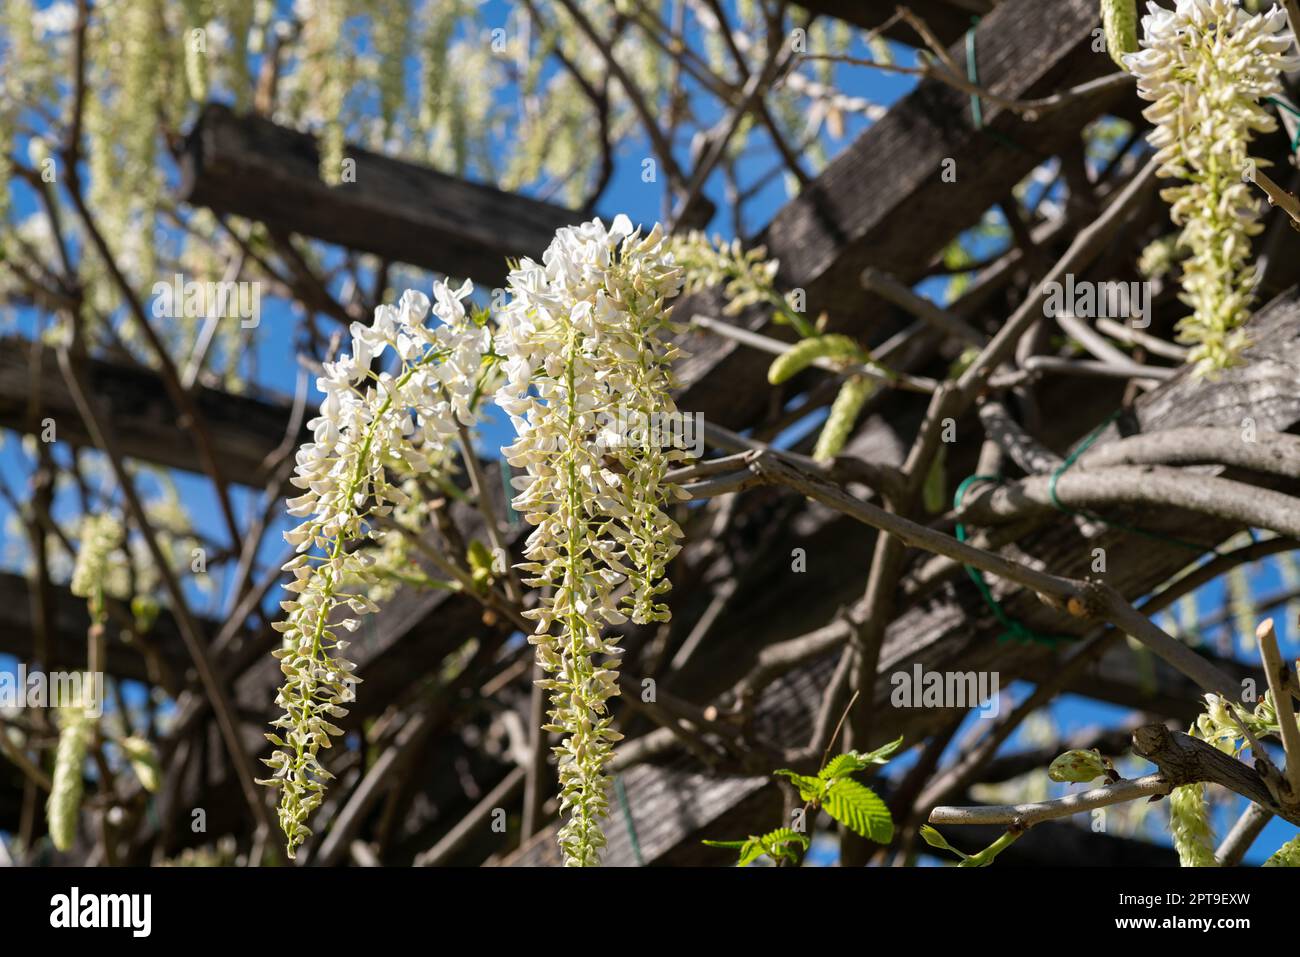 In spring the wisteria blooms, the white-petaled flowers descend in clusters from the pergola into the flower garden. It creates a flowery background. Stock Photo